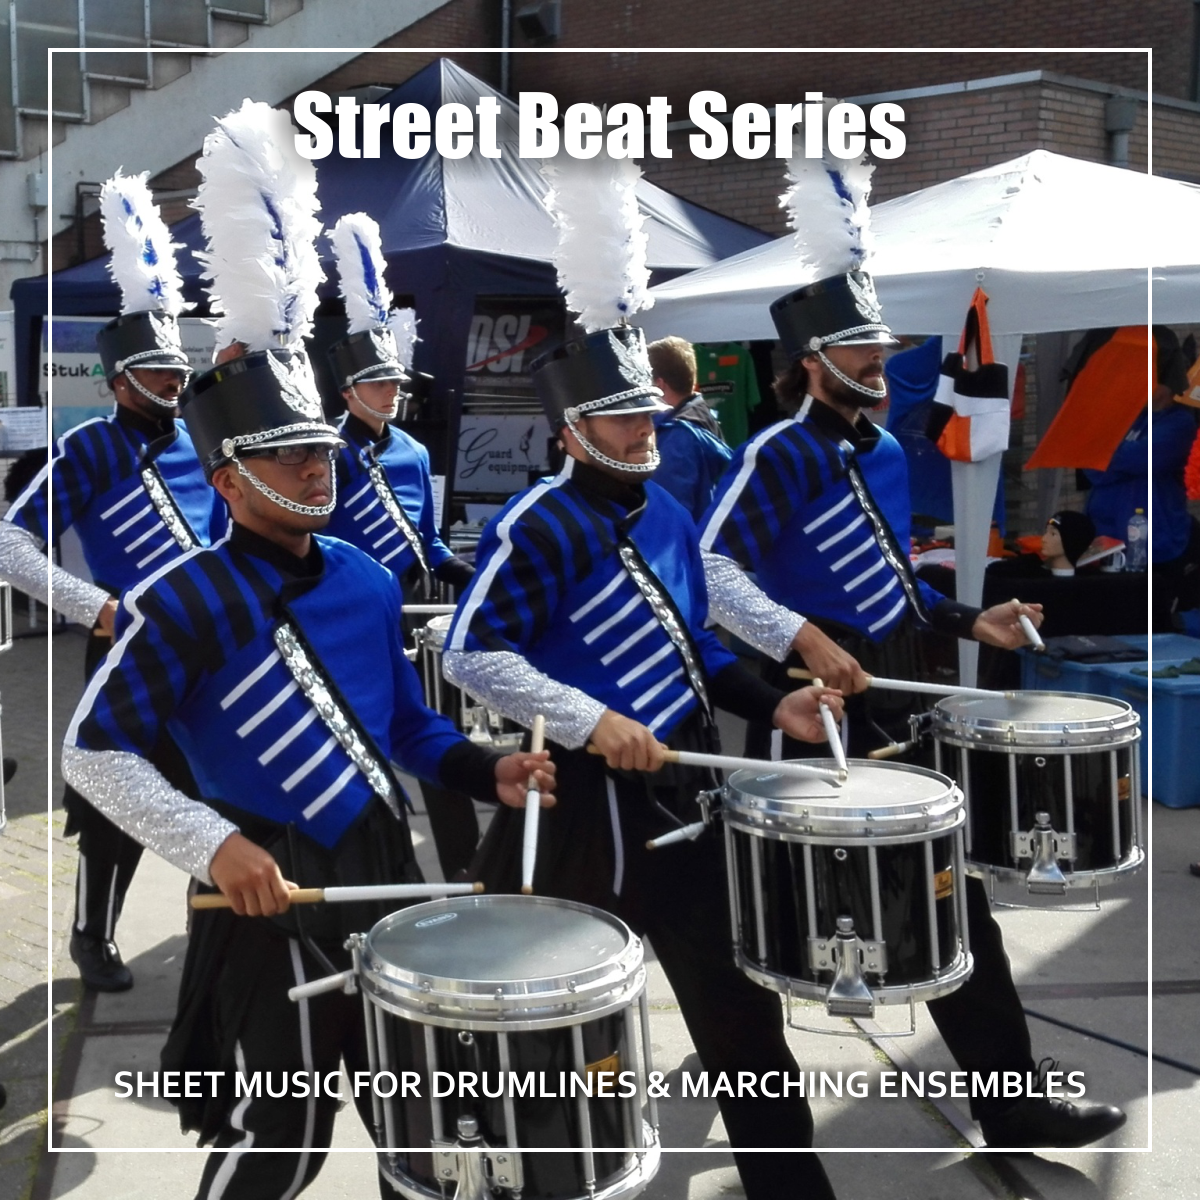 Street Beat Series | Sheet Music For Drumlines And Marching Ensembles